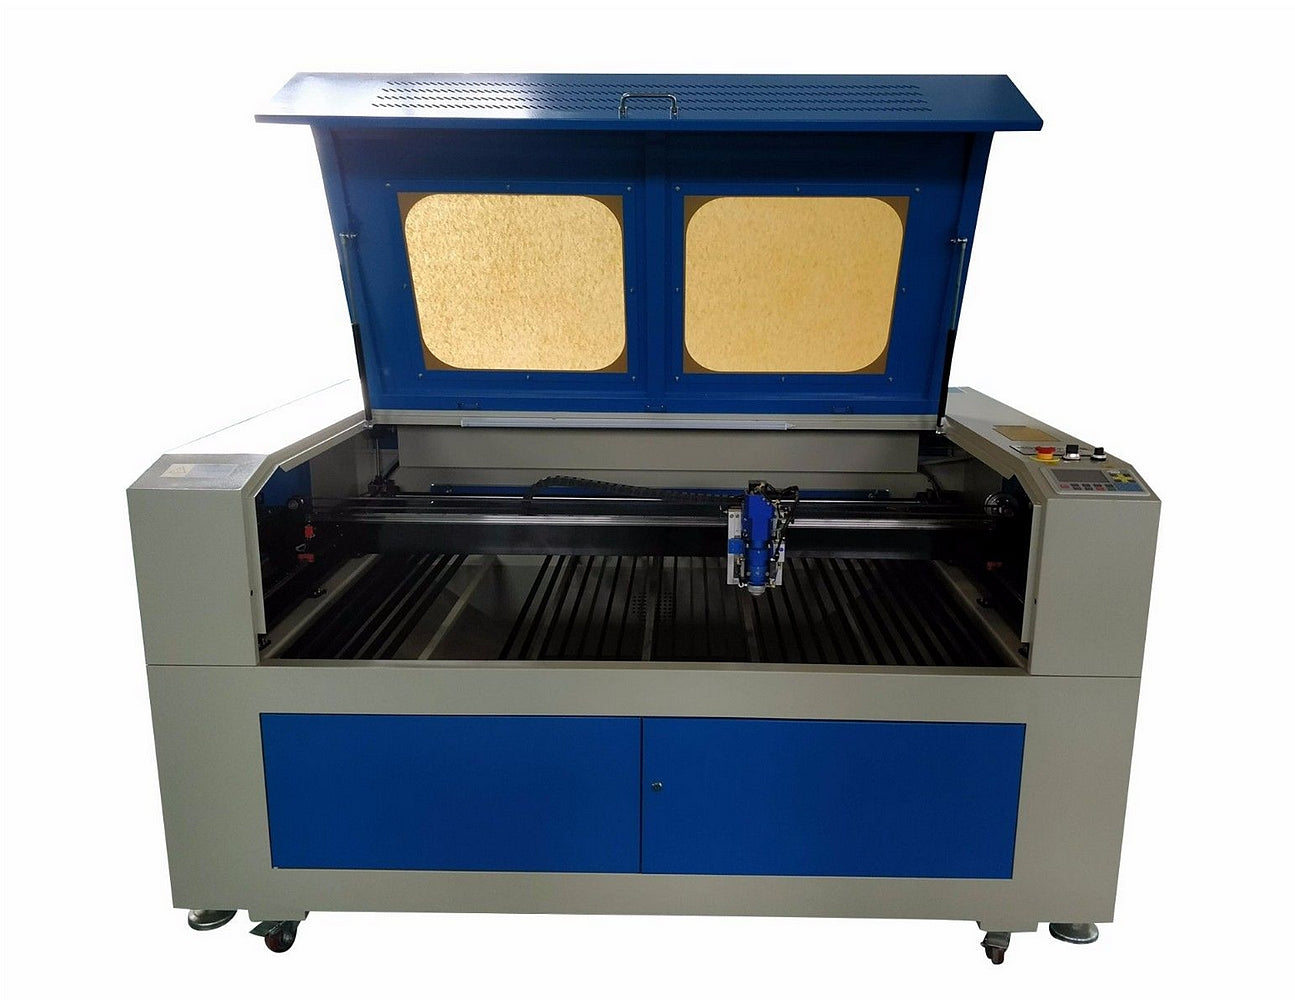  180W Co2 Laser Cutter Machine 100W Dual-Head Co2 Hybrid Laser  Cutter Machine with 51-3/16''×35-7/16'' Blade+Honeycomb+Lifting Workbench  for Stainless Steel, Wood, Acrylic